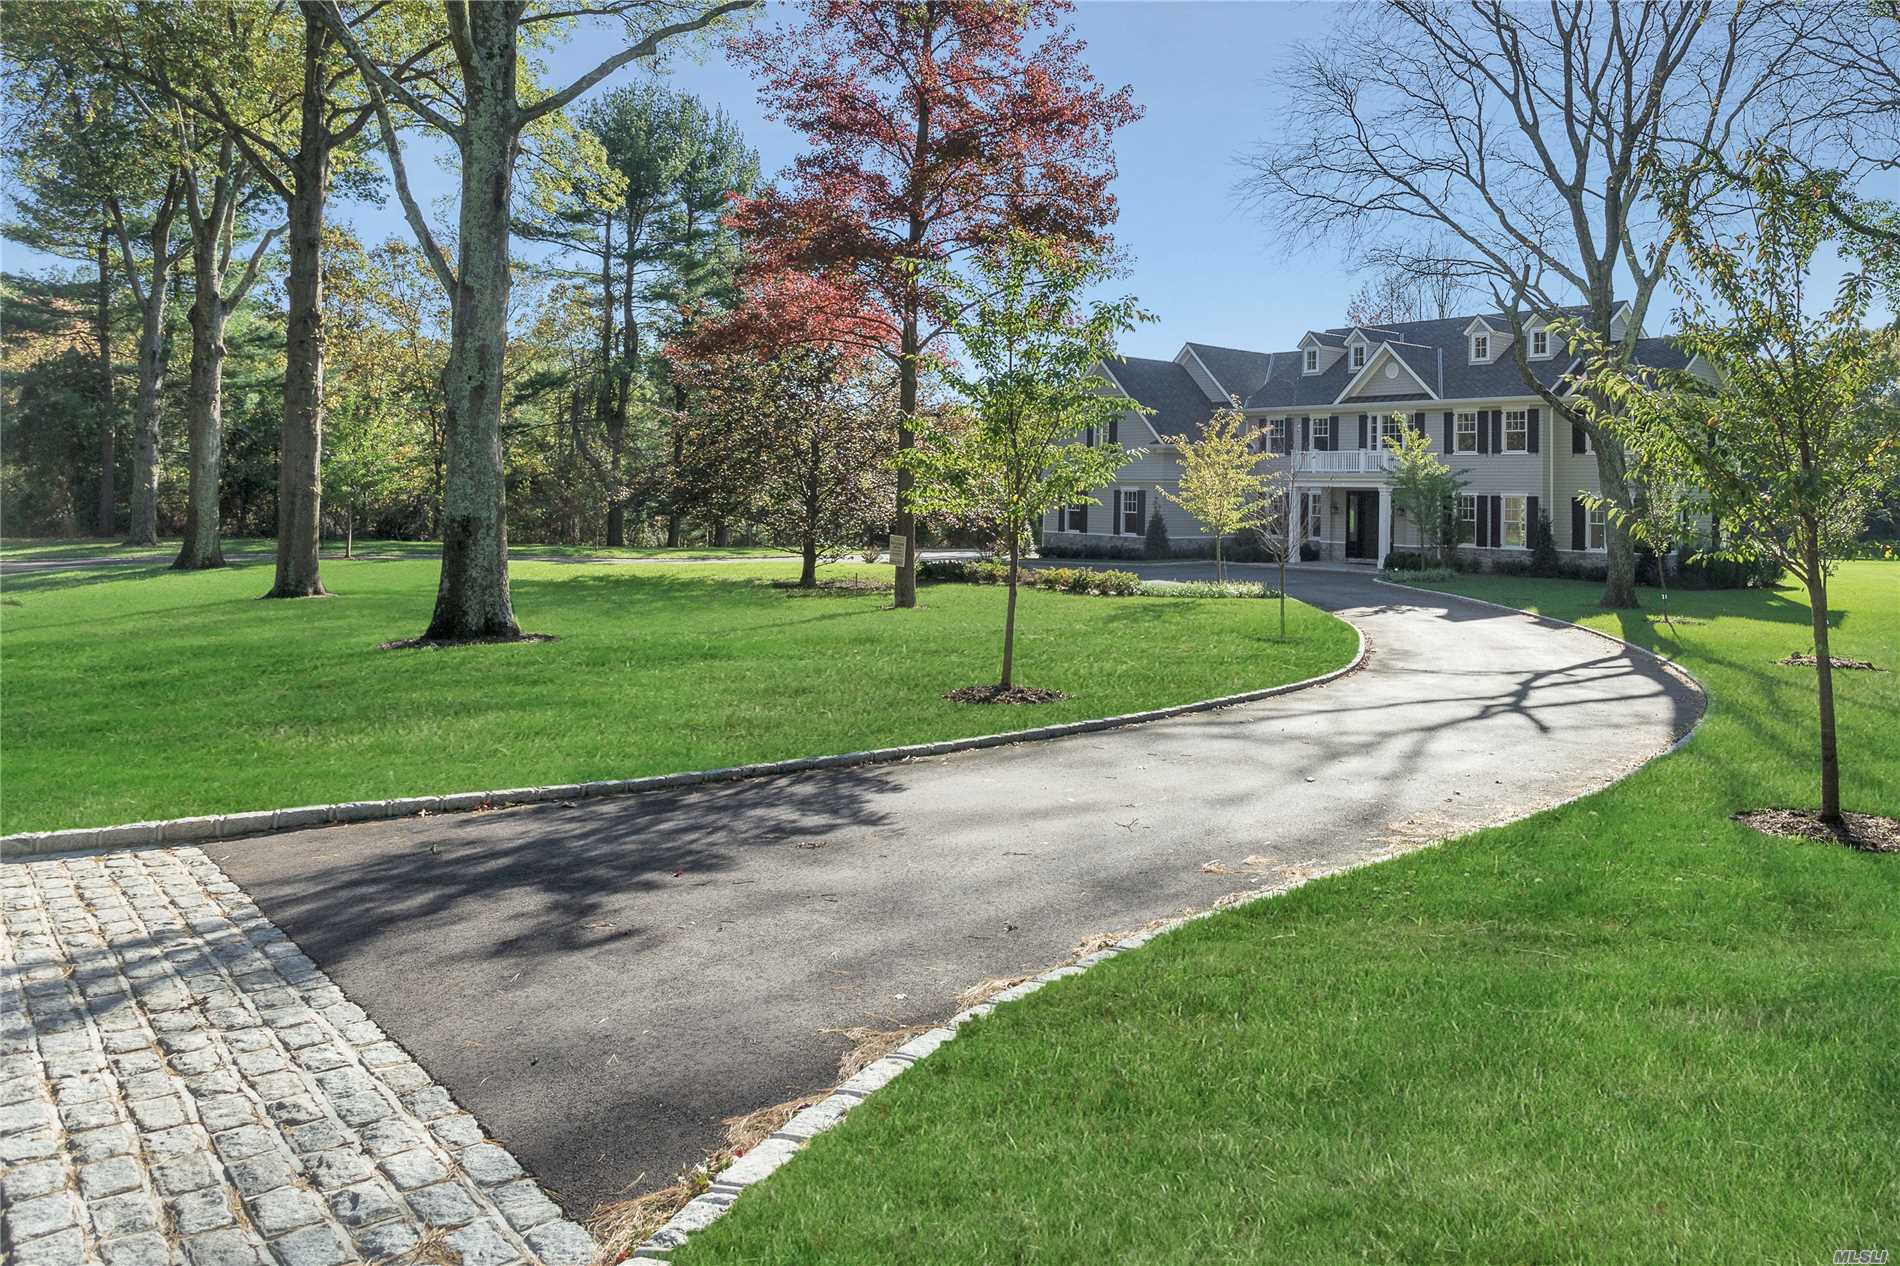 Imagine living in a brand new, state-of-the-art six-bedroom, five-and-a-half-bath home with a traditional manor-house style in a beautiful mature neighborhood of two-acre-plus homes and with only a modicum of passersby. Such is what this magnificent home offers. Standing majestically on 2.11-acres of sweeping emerald lawns dotted by towering mature trees and enfolded on three sides by walls of foliage, and approached by a long circular drive, this fabulous, newly finished Colonial has it all, including room for a possible pool and tennis court and an ideal location. Situated in the heart of Old Westbury, the home part of a section of homes that has one entrance, two cul-de-sacs, and a circular road - ideal for pleasant strolls or biking. Practically surrounded by golf courses and universities, the area is also within easy reach of major expressways for easy commuting. Long a popular area for Manhattan’s magnates and luminaries, Old Westbury is just 30 minutes by railway or highway from Manhattan and Kennedy and LaGuardia airports. Conveniently located near parks and museums, it is just a short drive from fine dining, premier shopping, miles of public equestrian trails, polo club, yacht clubs and beaches.  
Its traditional center-hall floor plan has been beautifully tweaked to allow easy, open flow throughout its entertaining spaces, with French doors ready to close for privacy when needed. Boasting gleaming hardwood floors, elegant crown moldings, and a myriad of windows and French doors, the first floor welcomes guests through a vestibule, with guest closets, into a spectacular two-story entrance foyer with graceful bridal staircase and stunning powder room. To the left, is the banquet-sized formal dining room in all its elegance, and to the right, a parlor is open to the inviting great room with its magnificent marble-faced gas fireplace and windows plus French doors opening to the rear property. Entered from the parlor and the living room, the spacious and sunny library/den is flooded with verdant views through many windows on three exposures.
Entered from the great room and the foyer, spacious sun-drenched eat-in-kitchen offers the finest in today’s finishes and appliances. Gray glass-tile backsplash accents custom oak stained walnut cabinetry with white quartzite countertops and farm sink while a large cherry center island, with prep sink and seating area, coordinates with the hardwood floors. High-send appliances include a 6-burner stainless-steel gas stove with griddle and double-oven; a side-by-side, integrated full-size refrigerator and full-size freezer; plus an integrated dishwasher; and a stainless-steel built-in microwave. A butler’s pantry, accessing the dining room, provides cabinetry, similar to the kitchen, plus entry to a large walk-in pantry. Fully open to the kitchen and the great room, the sunny breakfast area overlooks the rear property through a wall of French windows and door to the patio – idea for al fresco dining. A hall off the kitchen, with back stairs, leads to the attached three-car garage, a large mudroom with many closets, including one walk-in, and a well-equipped laundry room. A nearby guest suite features a designer bath with shower and a sunny bedroom with double-closet.
On the second floor, the palatial master suite enjoys its own private wing including an immense master bedroom with romantic gas fireplace; a dressing room with dressing table and pocket doors opening to two spacious walk-in closets; and a luxurious white-marble master bath. Several windows above a free-standing soaking tub allow sunlight to dance across the custom twin vanity, huge frameless-glass-enclosed shower, and door to the water closet. Across the foyer, the remainder of this level includes four additional bedrooms, each with walk-in closets, two with baths en suite, and two sharing a hall bath next to a spacious upstairs lounge. The full unfinished basement provides many opportunities for storage and expansion. Come experience the serenity and splendor of this exceptional, brand-new property, a perfect setting for today’s gracious North Shore lifestyle.